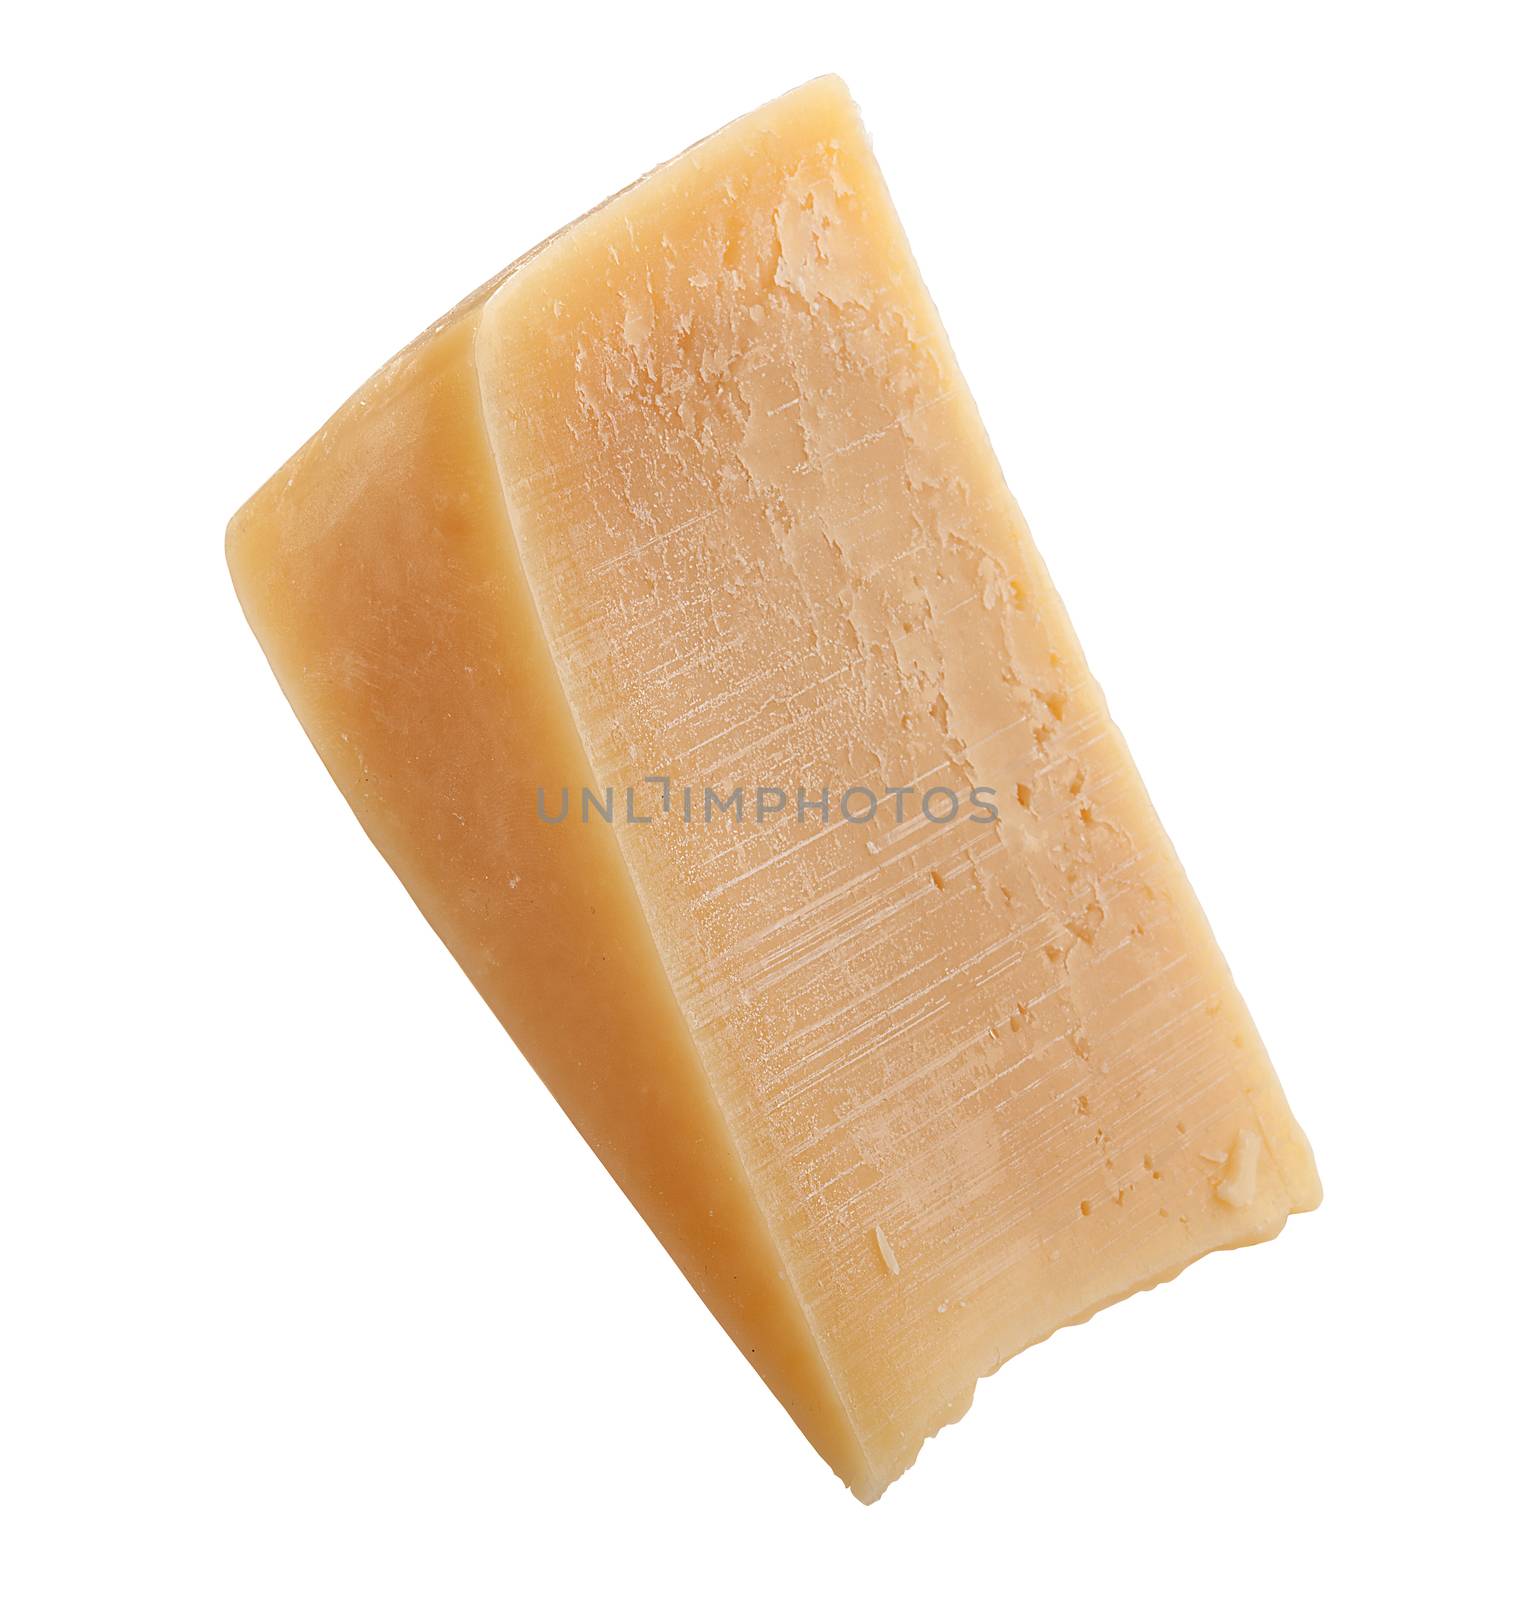 Isoalted slice of parmesan cheese on the white background